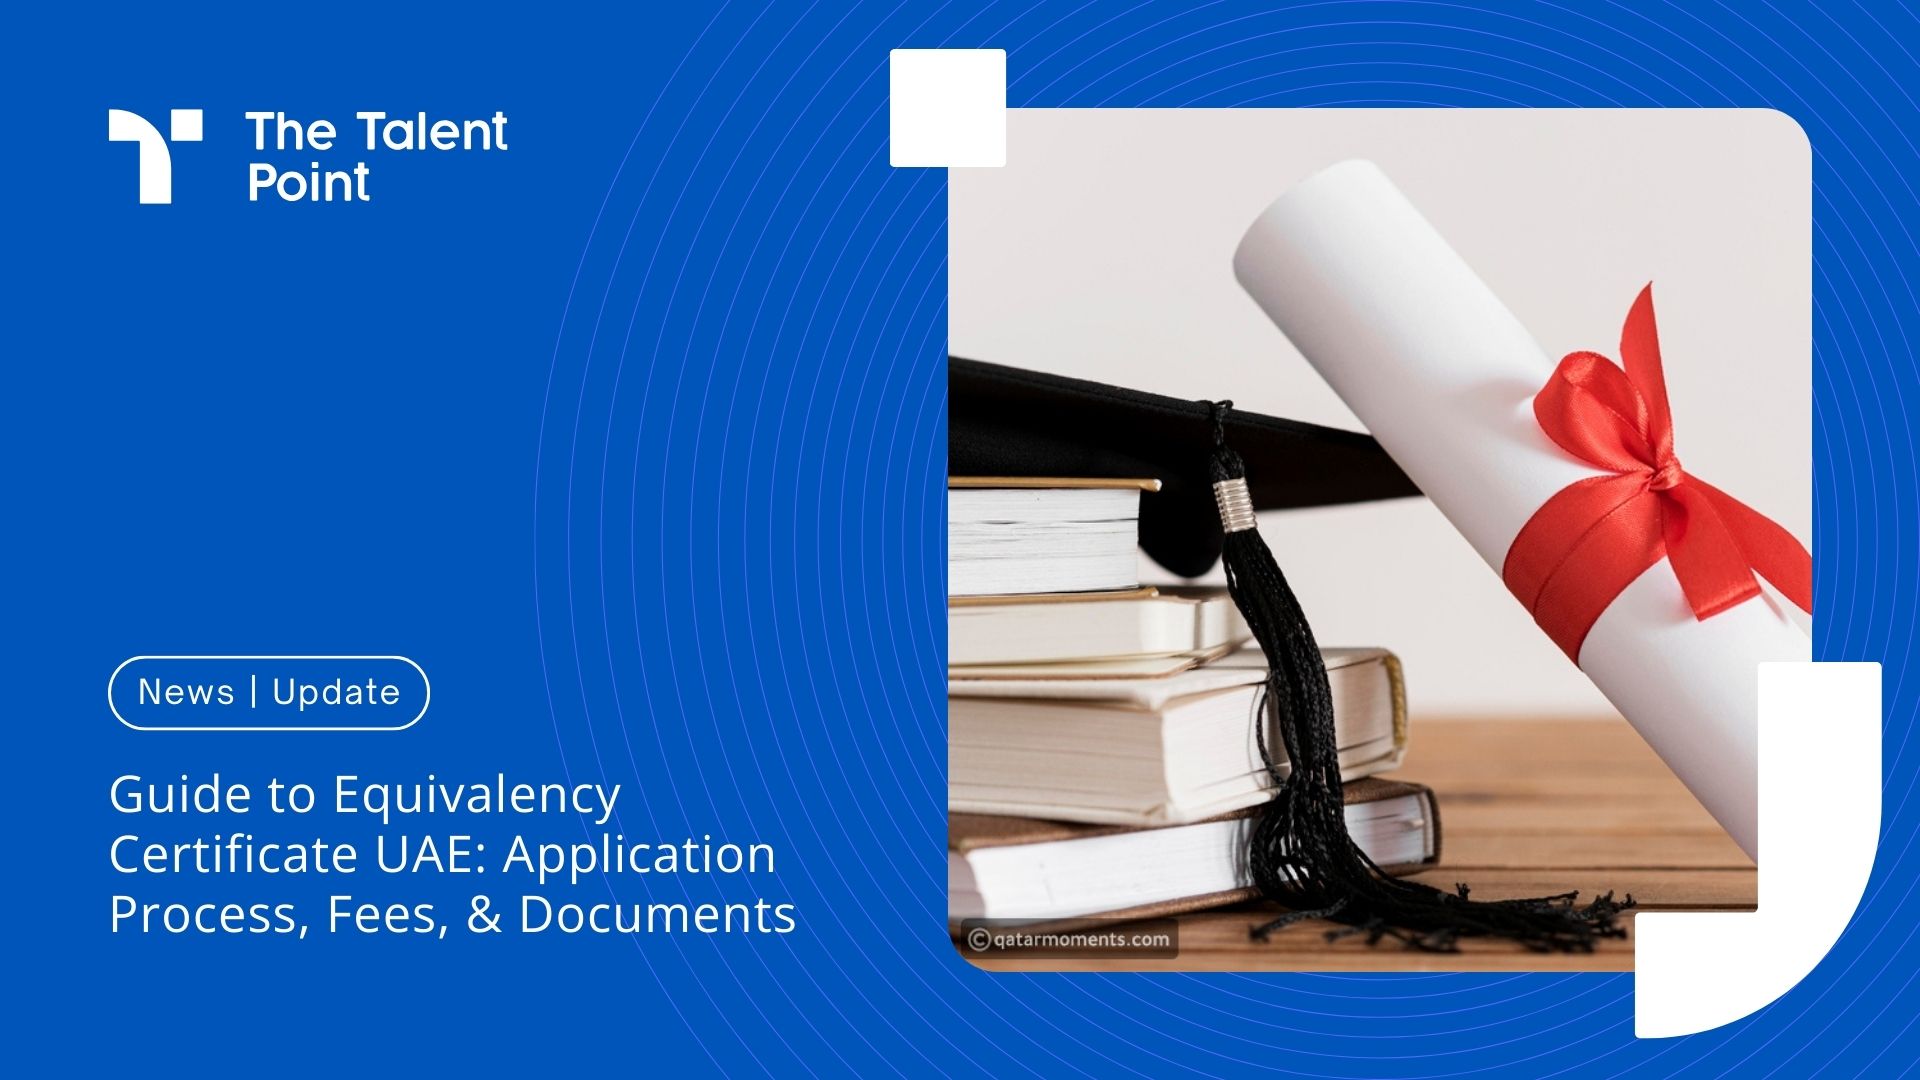 Guide to Equivalency Certificate UAE: Application Process, Fees & Documents